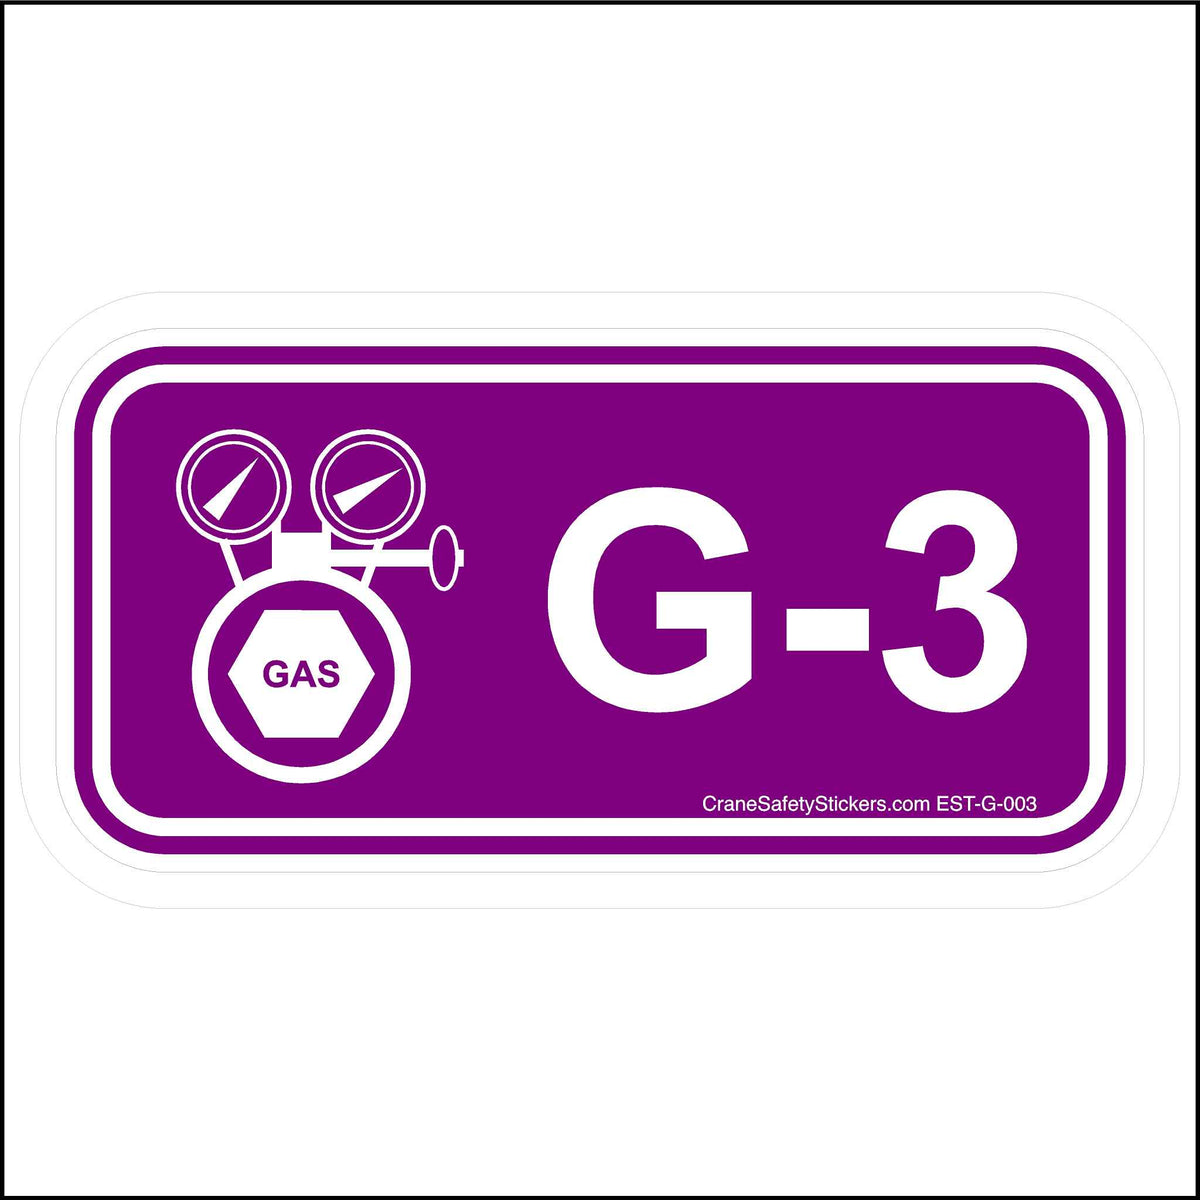 Energy Control Program Gas Disconnect Stickers G-3.